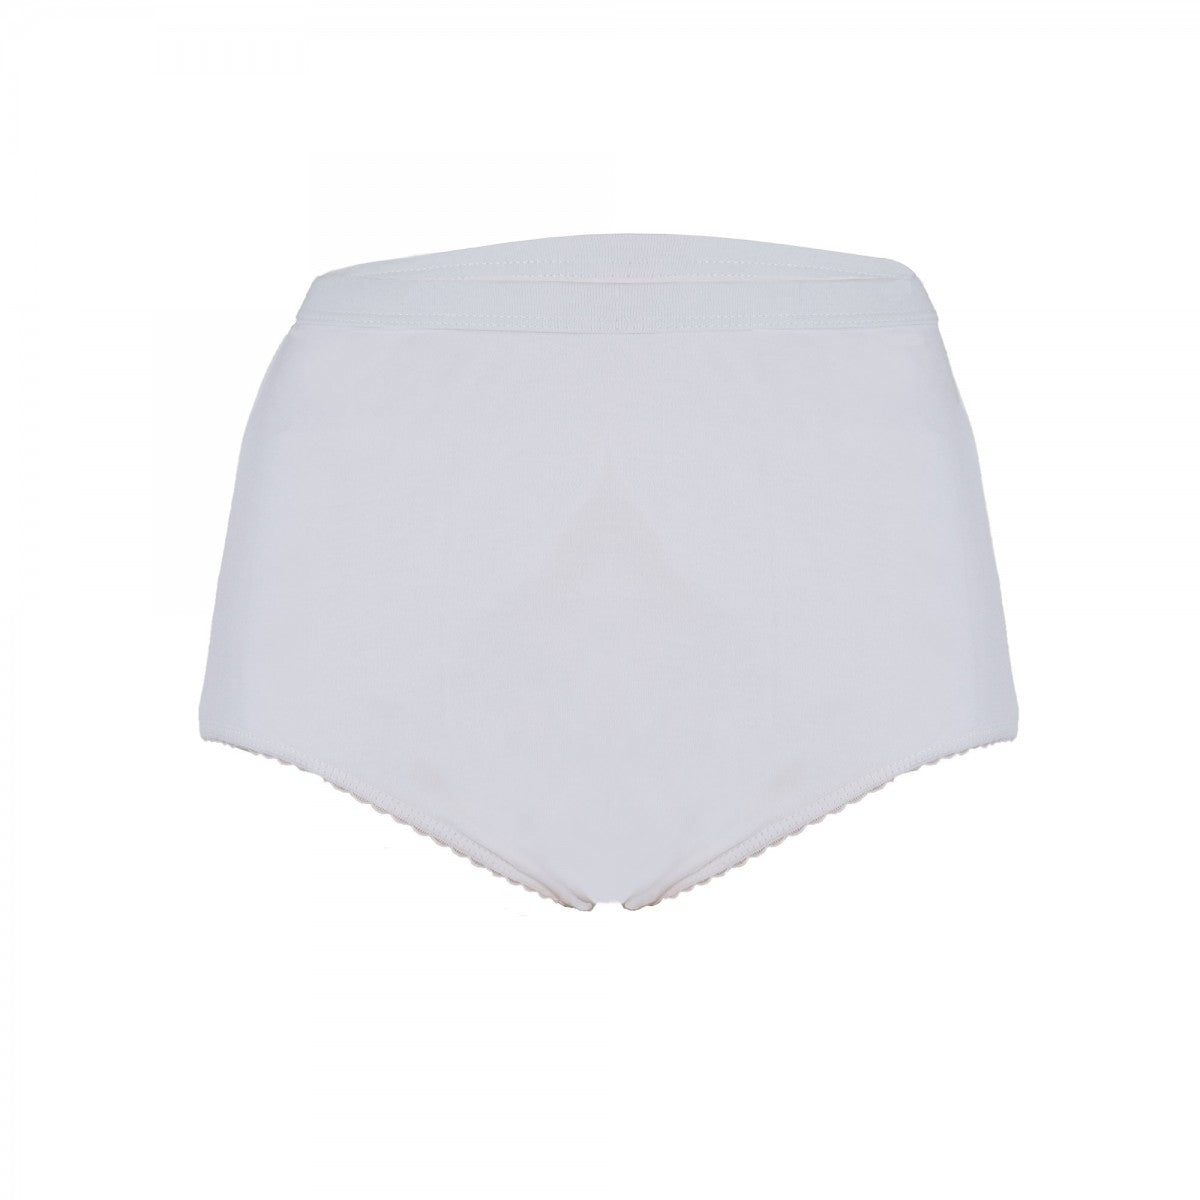 Rdeghly Cotton Breathable Washable Reusable Incontinence Menstrual